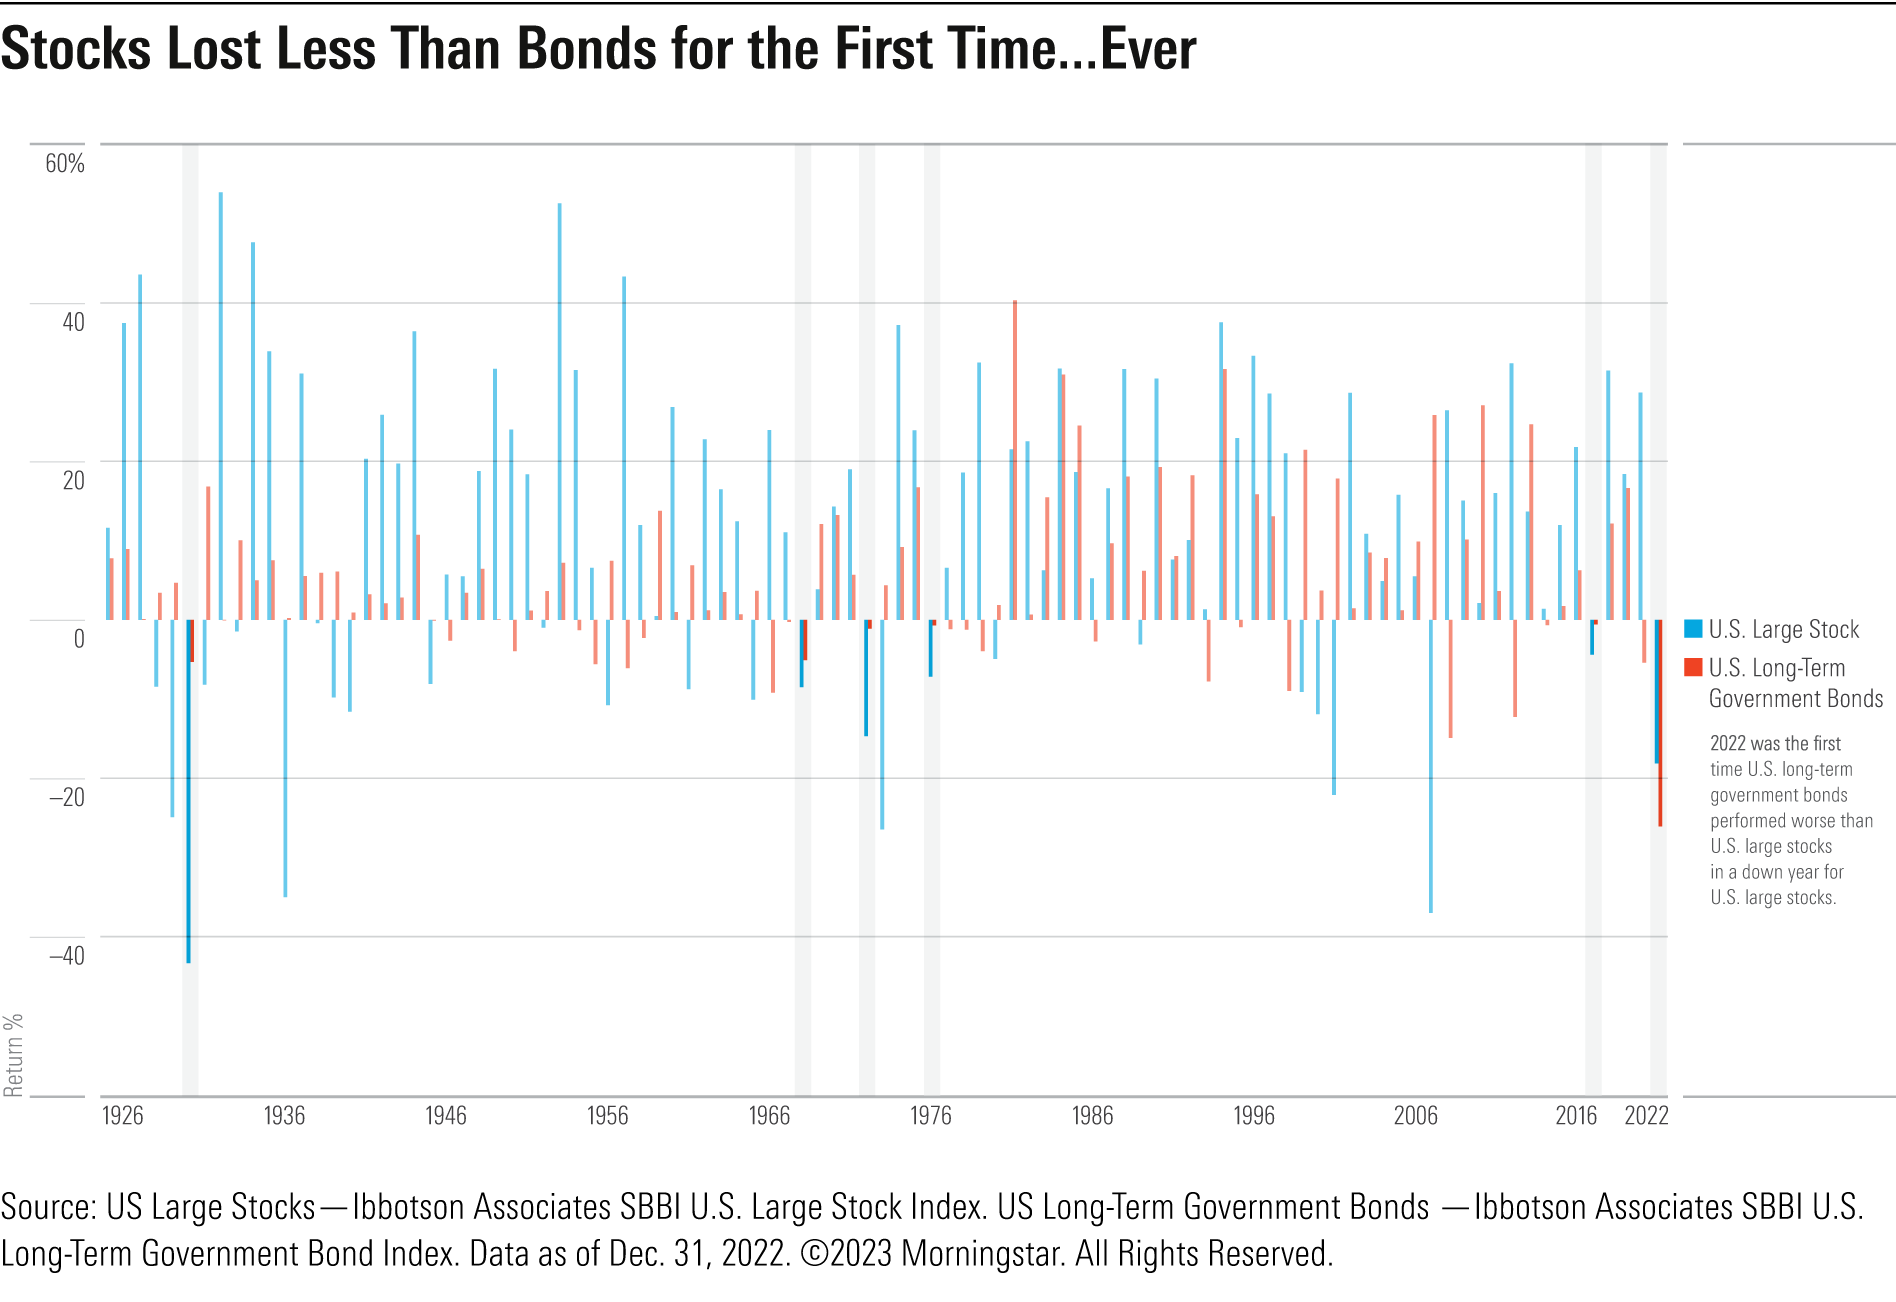 A bar chart shows that 2022 was the first year in which both stocks and bonds posted negative returns, with bonds experiencing worse returns.